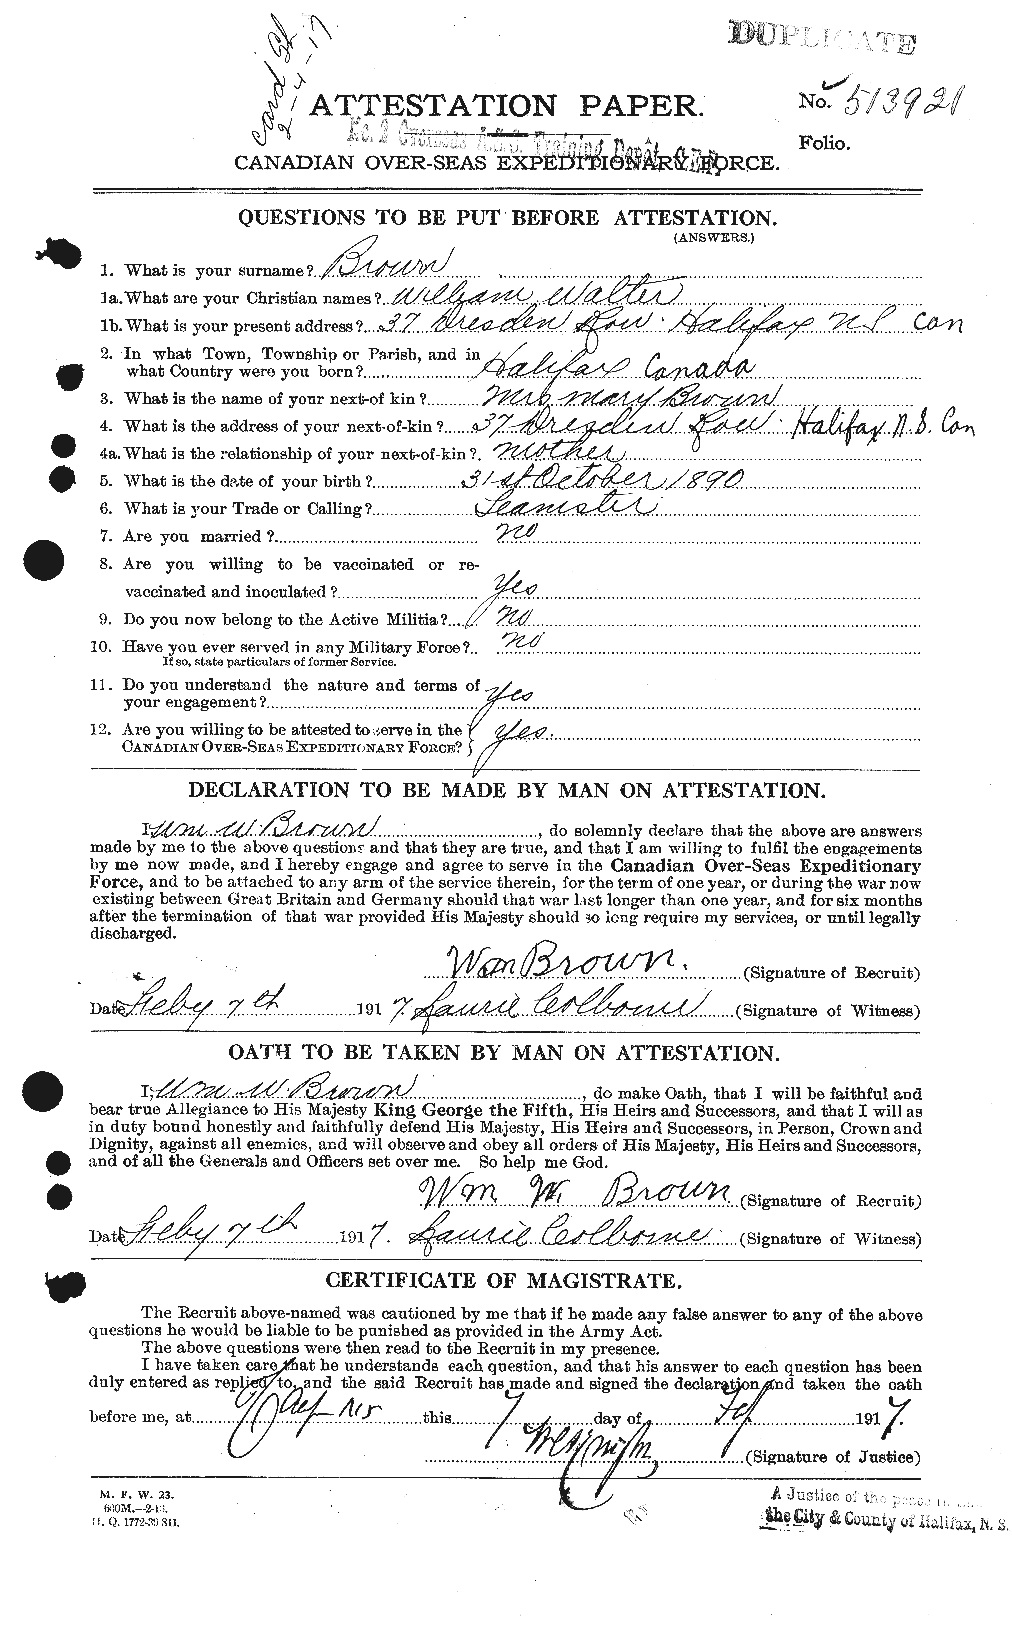 Personnel Records of the First World War - CEF 270898a